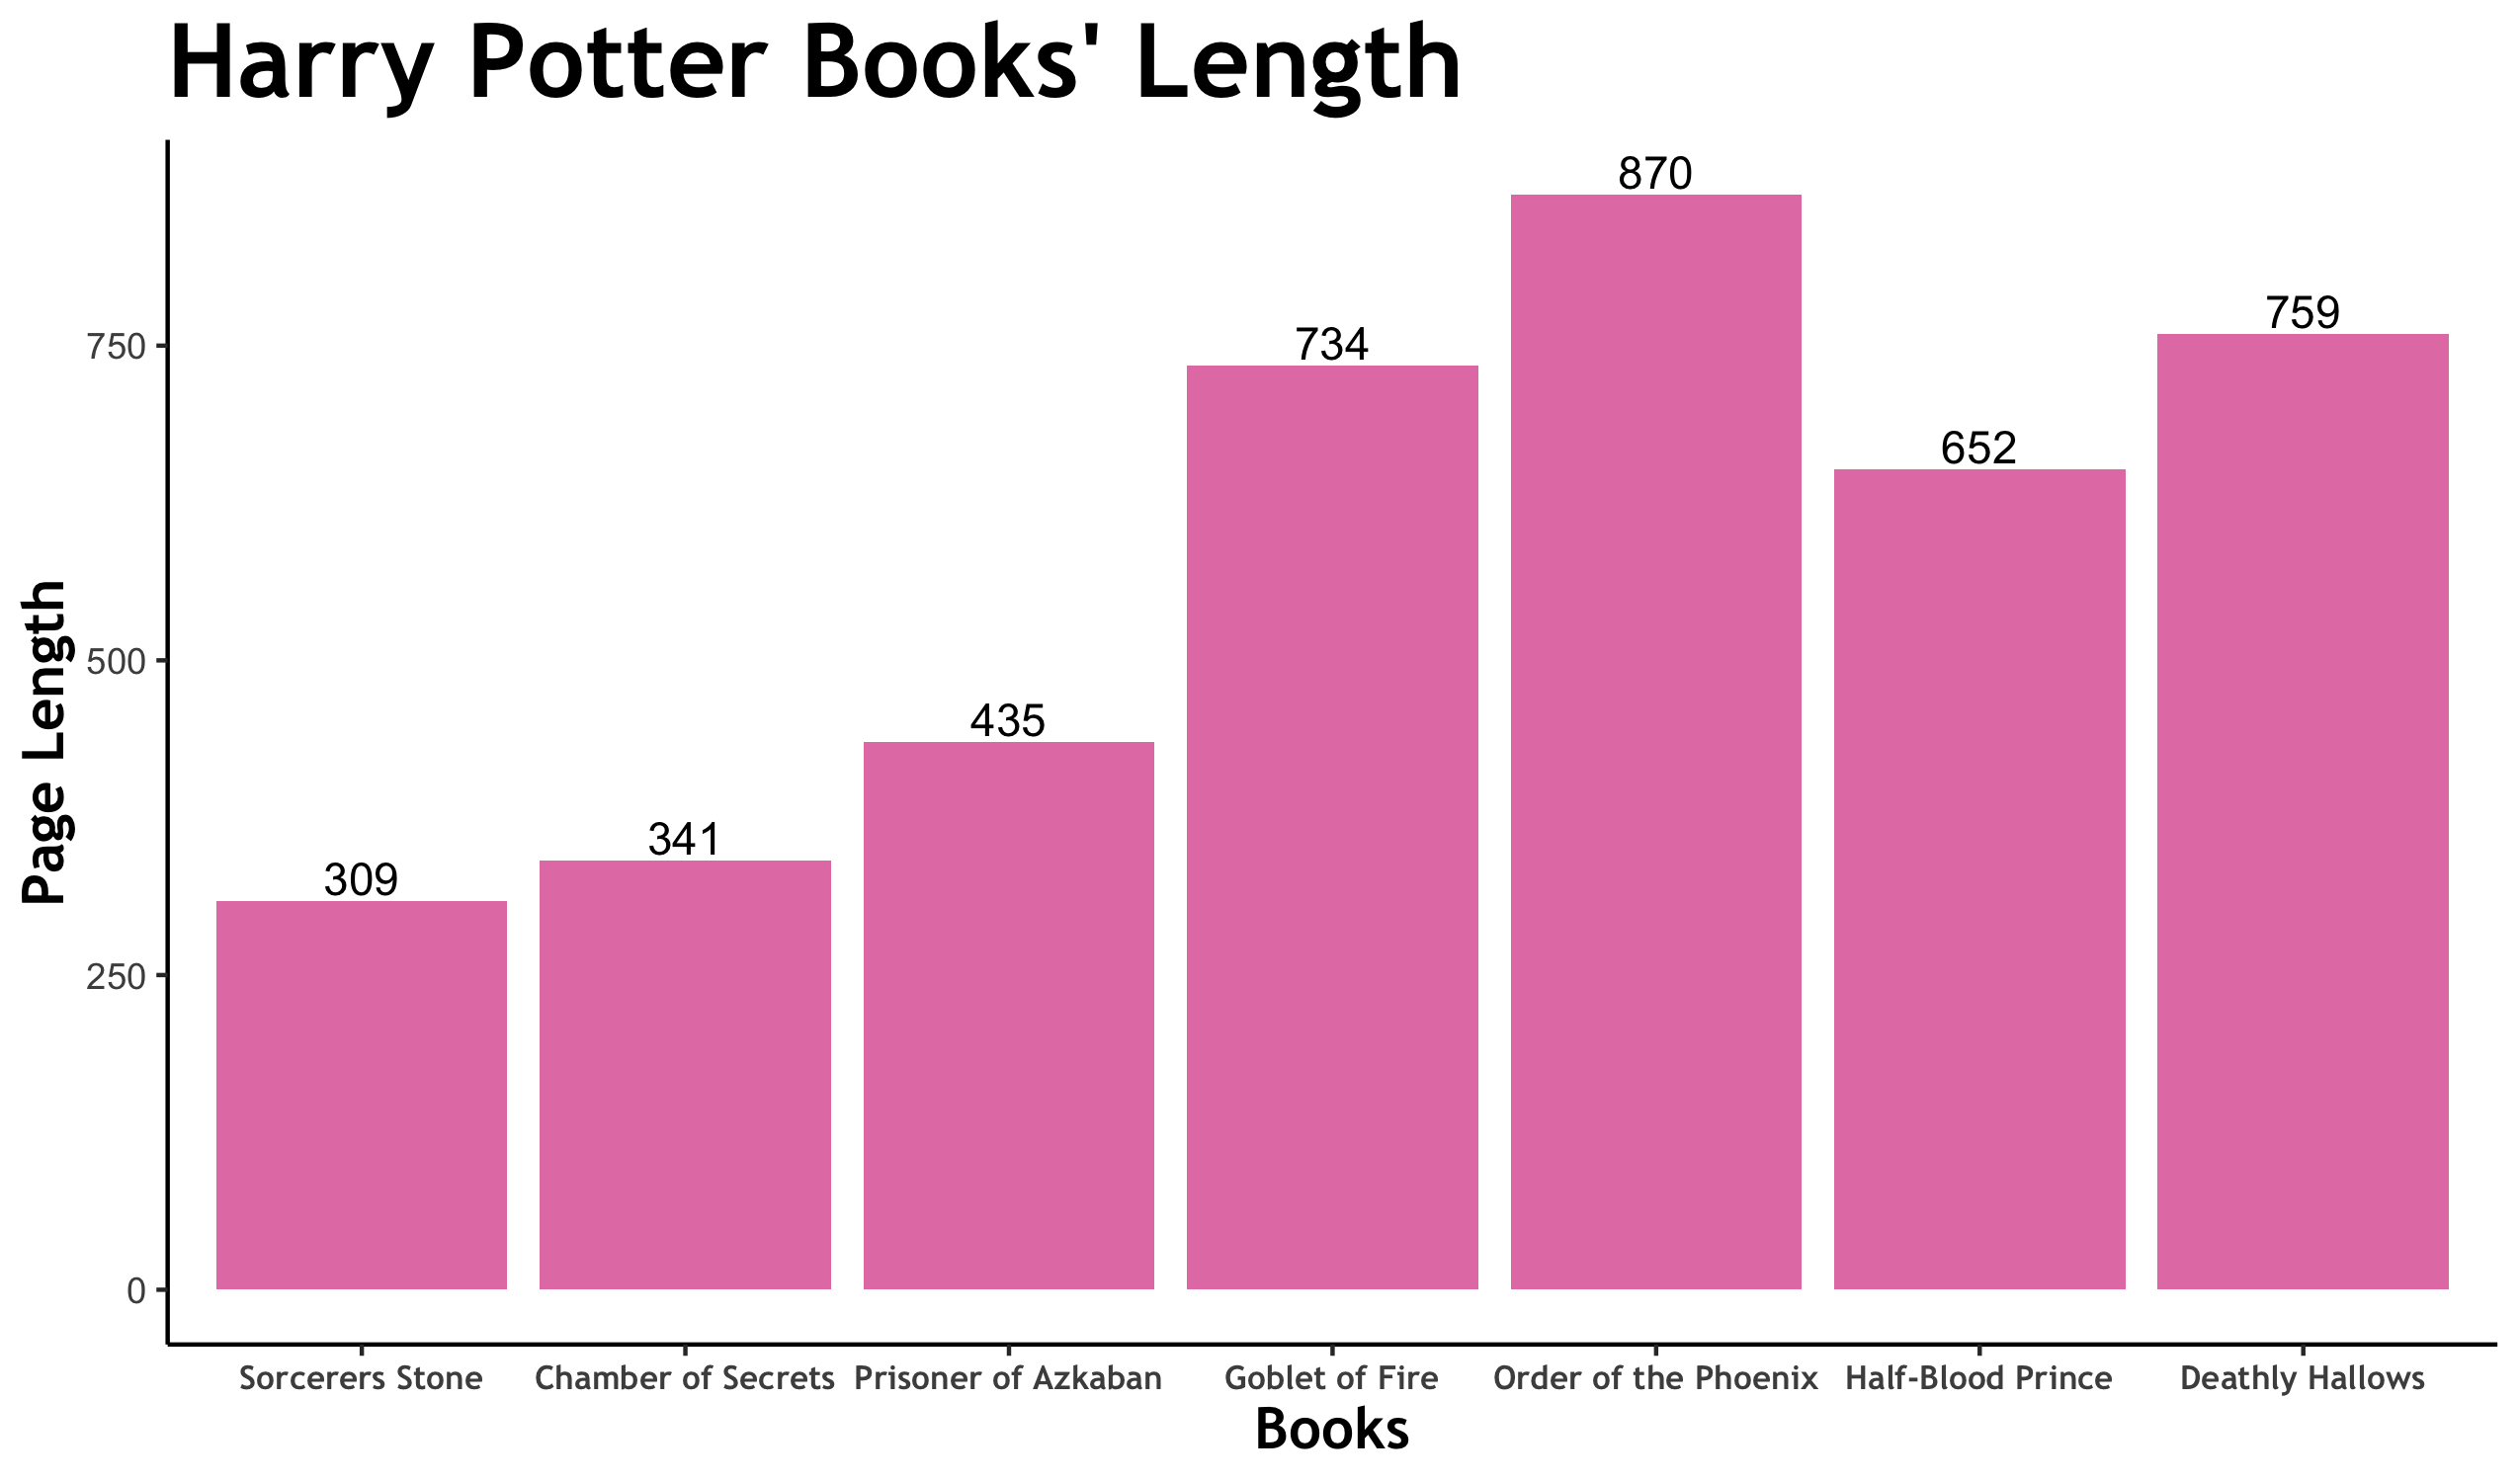 How many pages are in each Harry Potter book? 2